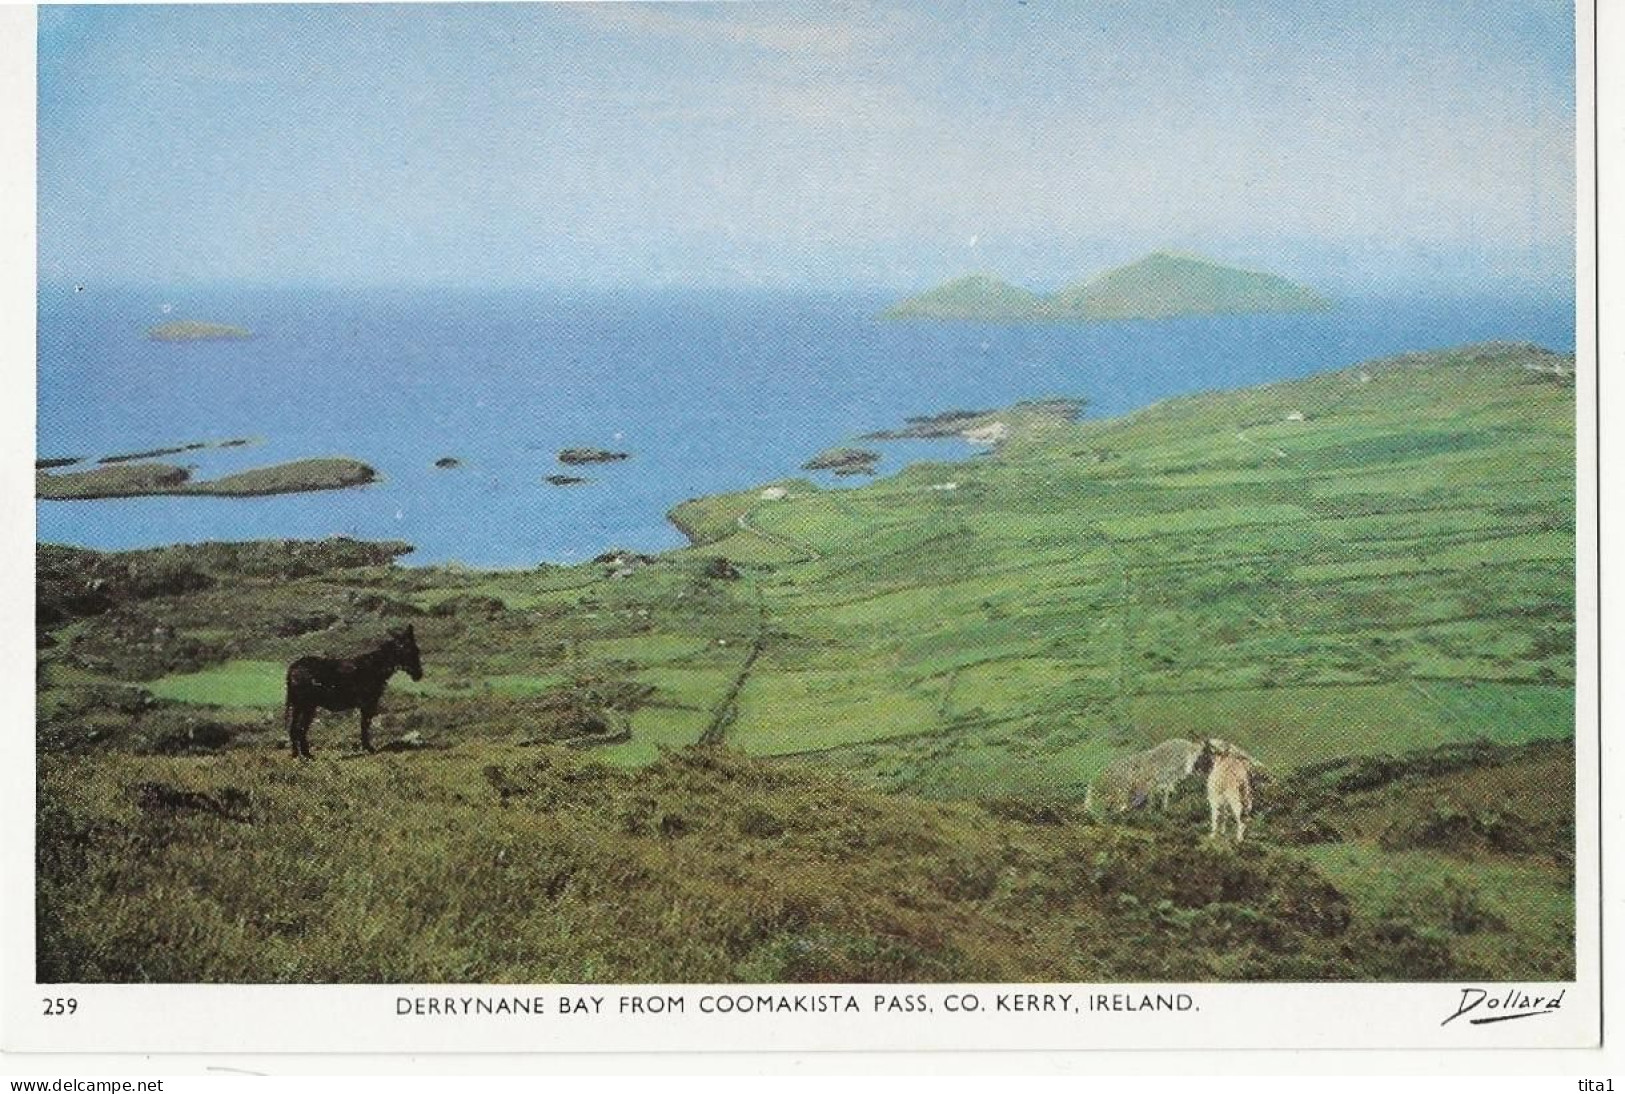 159 - Derrynane Bay From Coomakista Pass. Co. Kerry - Kerry